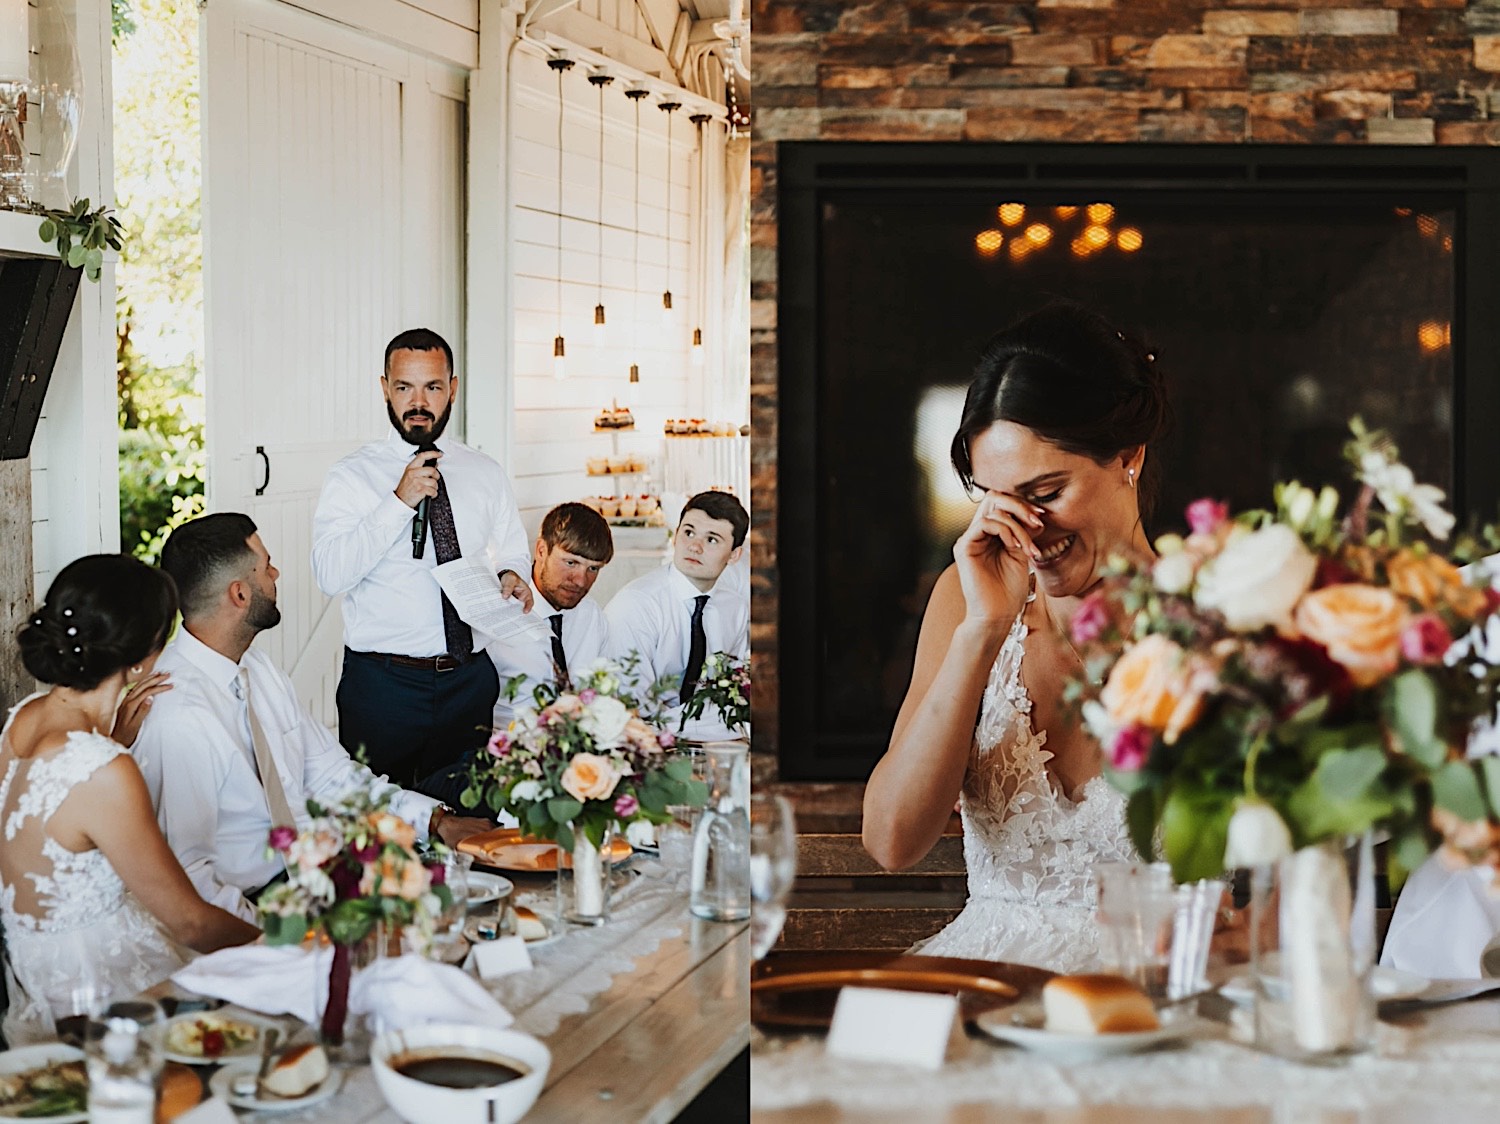 2 photos side by side, the left is of a groomsman giving a speech at a wedding reception, the right is of the bride smiling during the speech